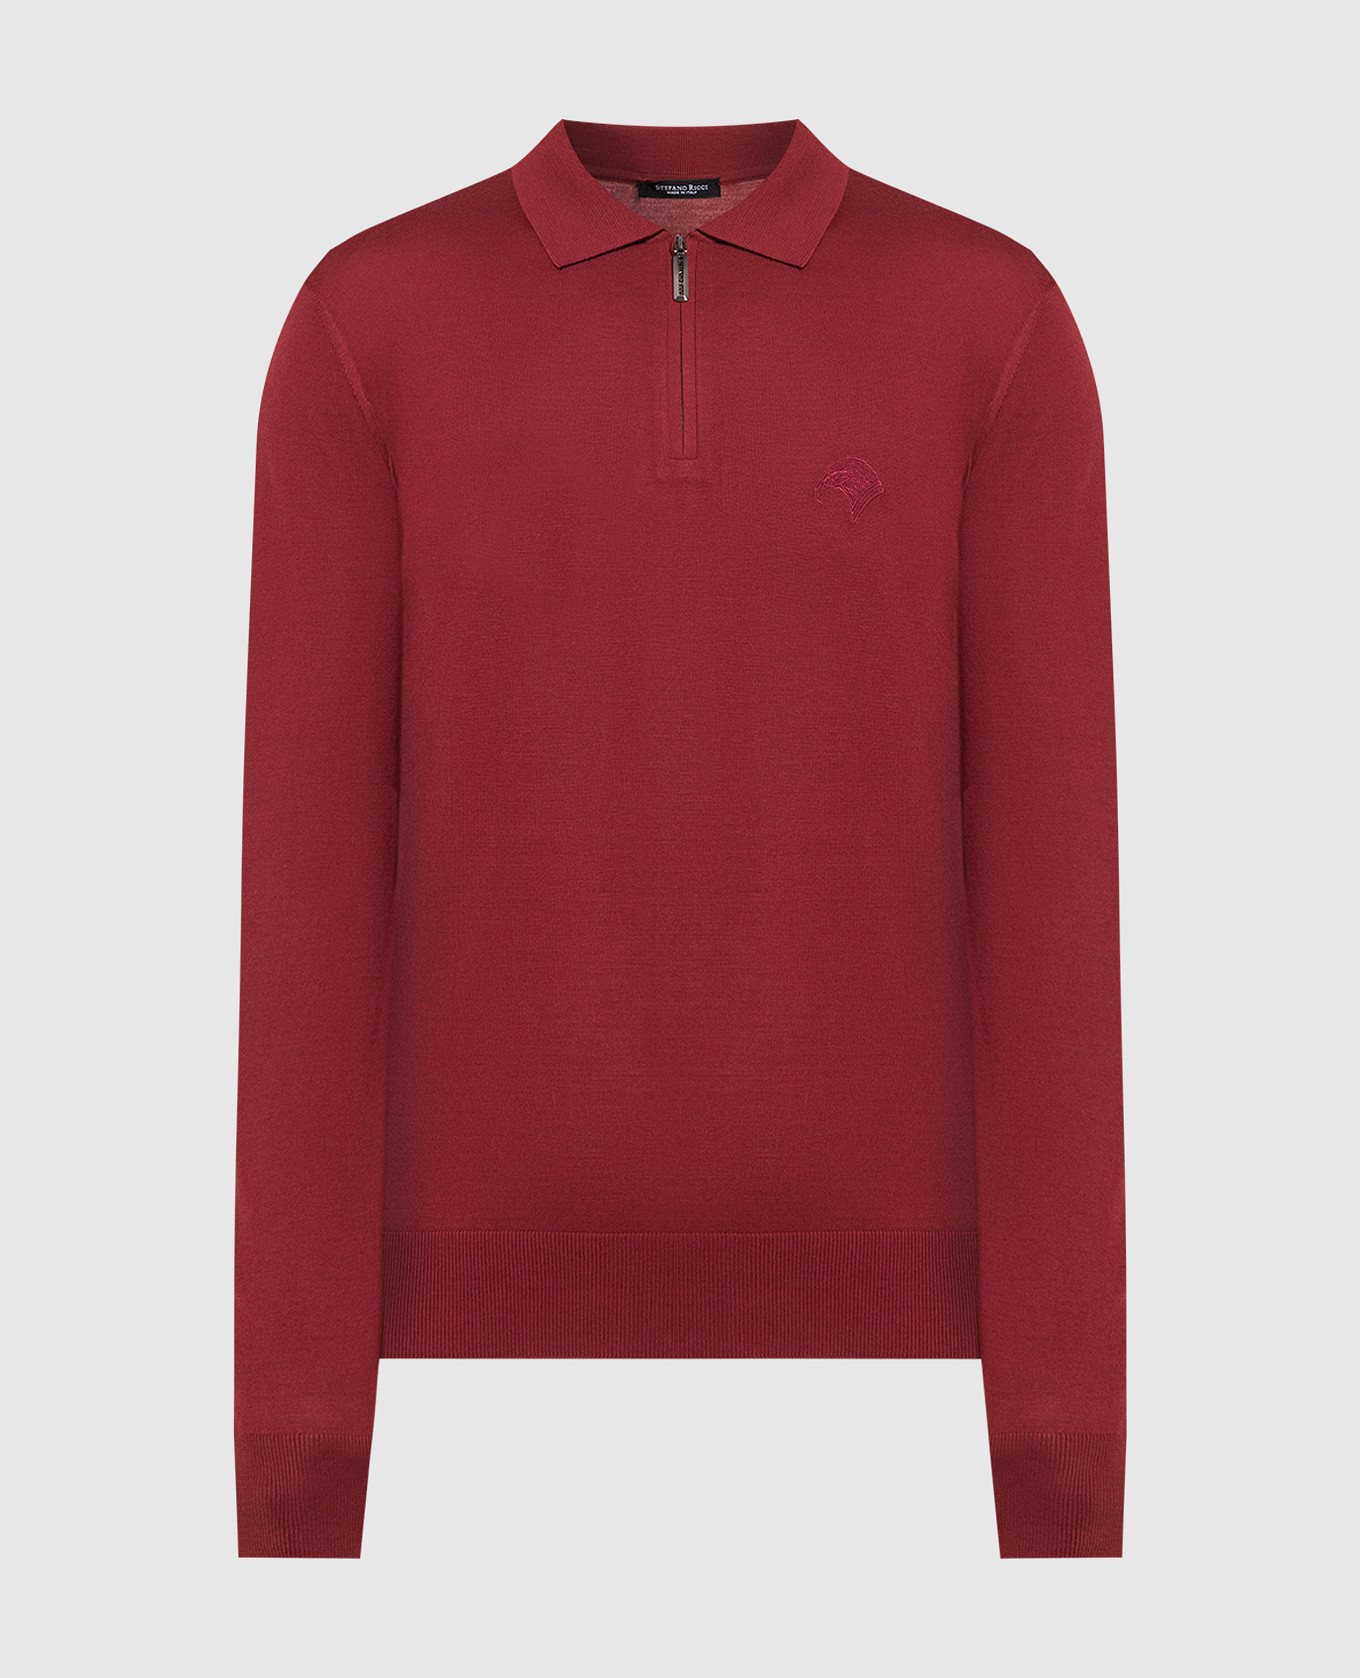 Burgundy wool polo shirt with logo embroidery